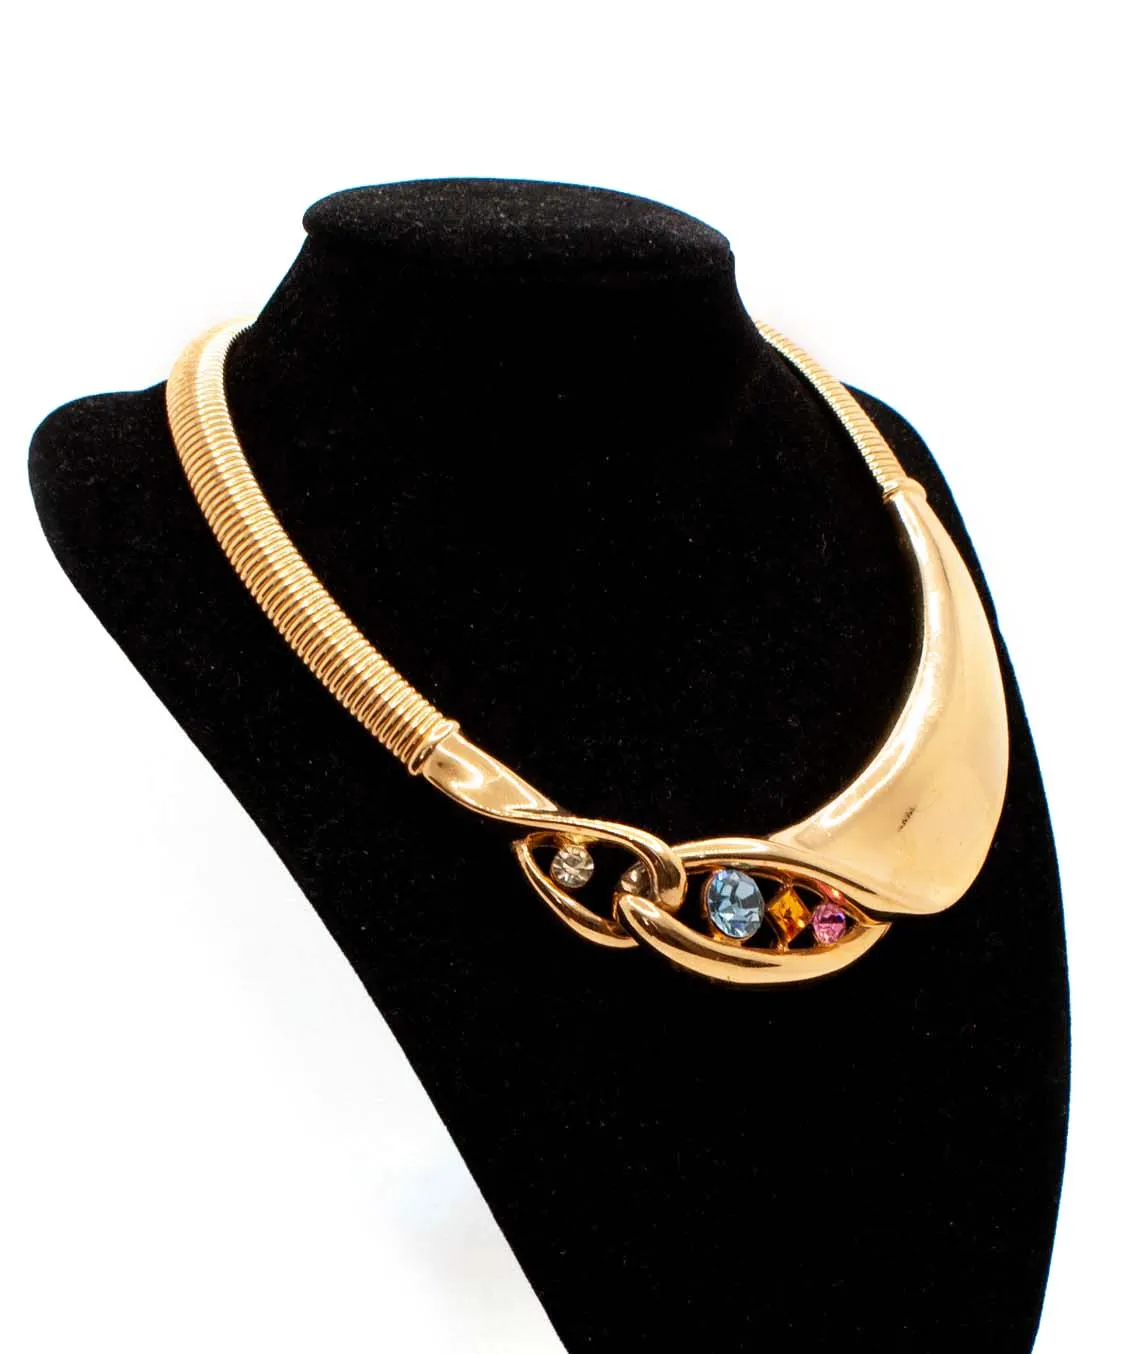 Givenchy gold tone crystal decorated collar necklace top view on a black display